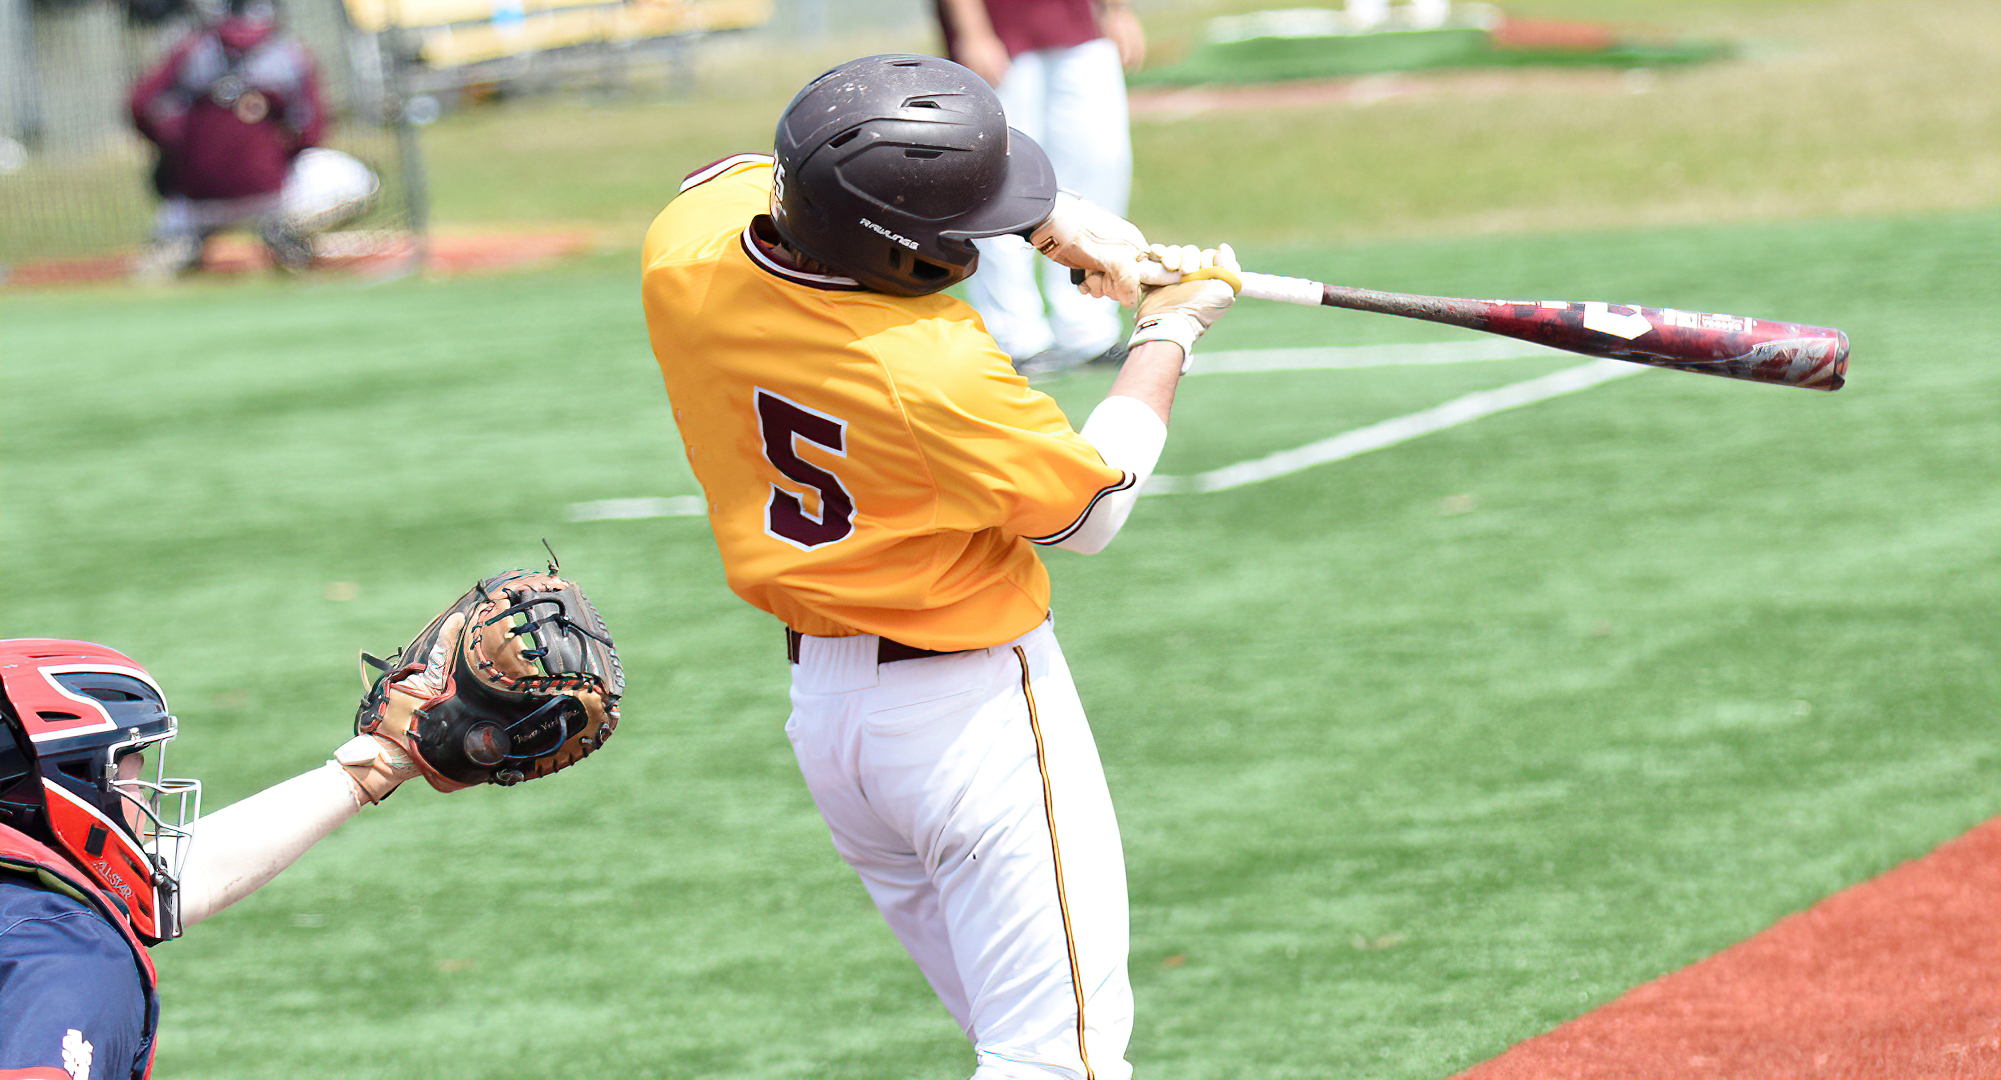 Carter Mulcahy had a hit in both games in the Cobbers' split with Calvin. He had two hits and two RBI and extended his hit streak to five games.